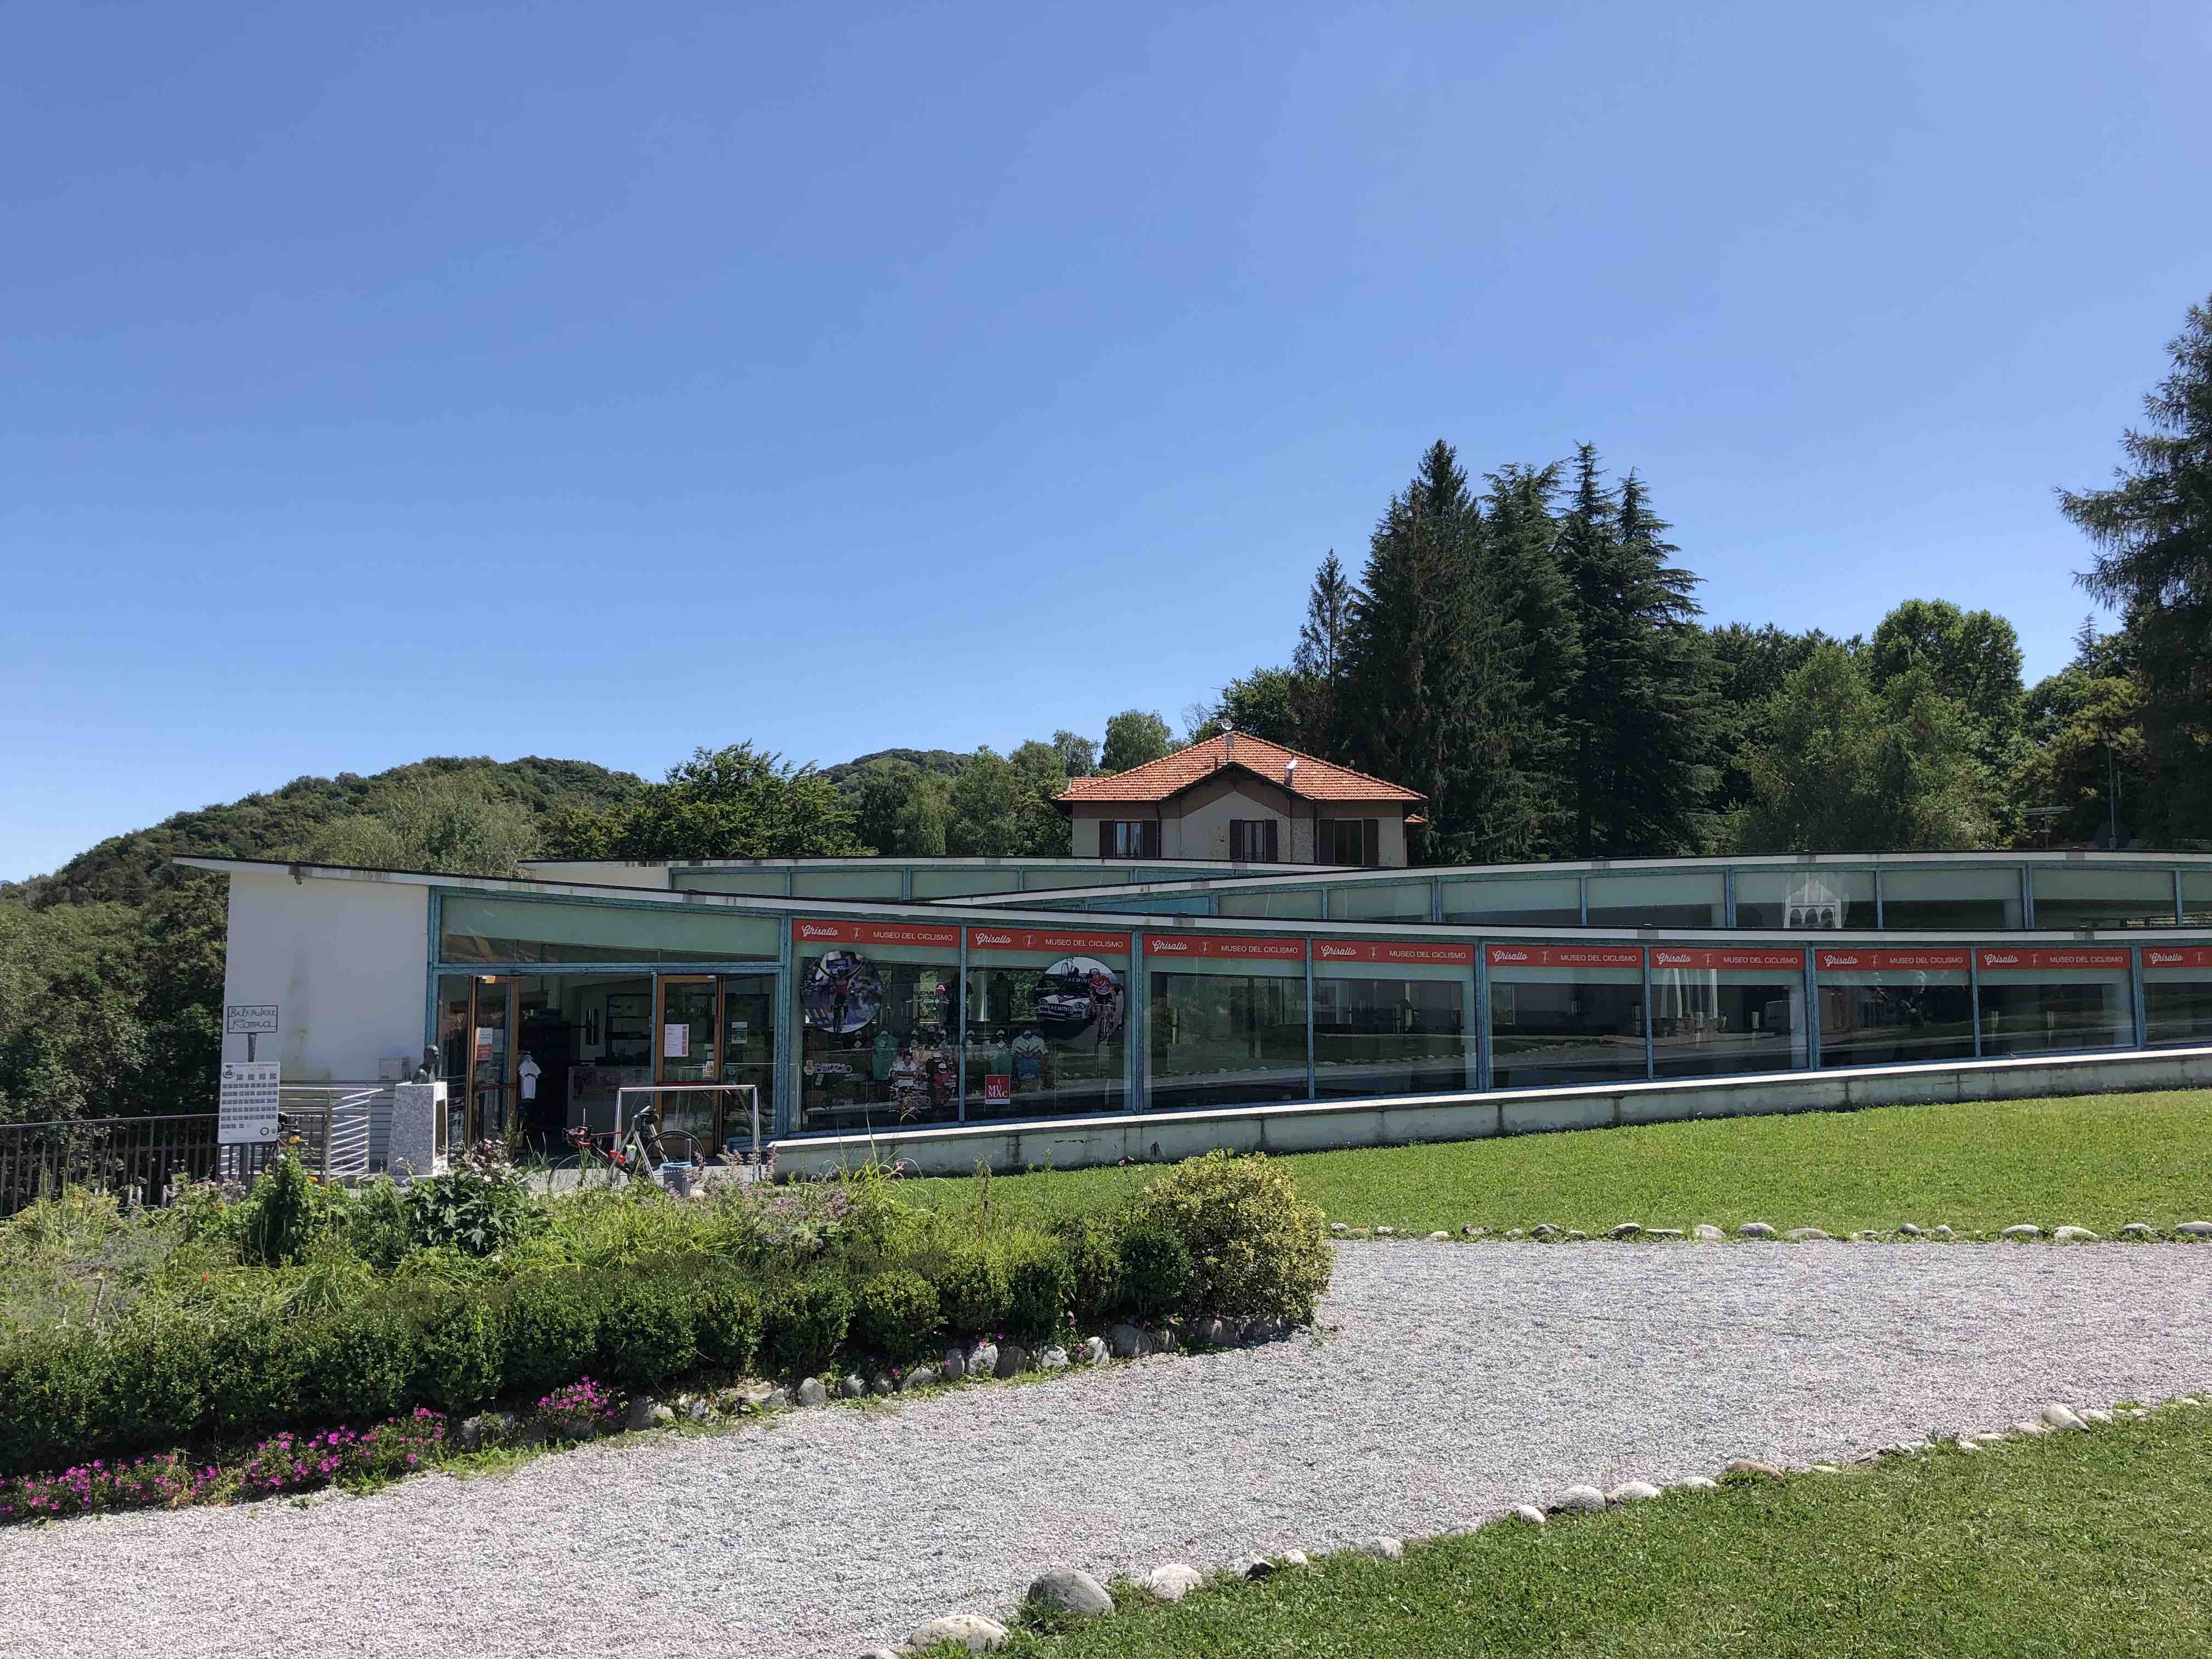 Modern museum of Museo del Ciclismo in the hills above Bellagio, Italy